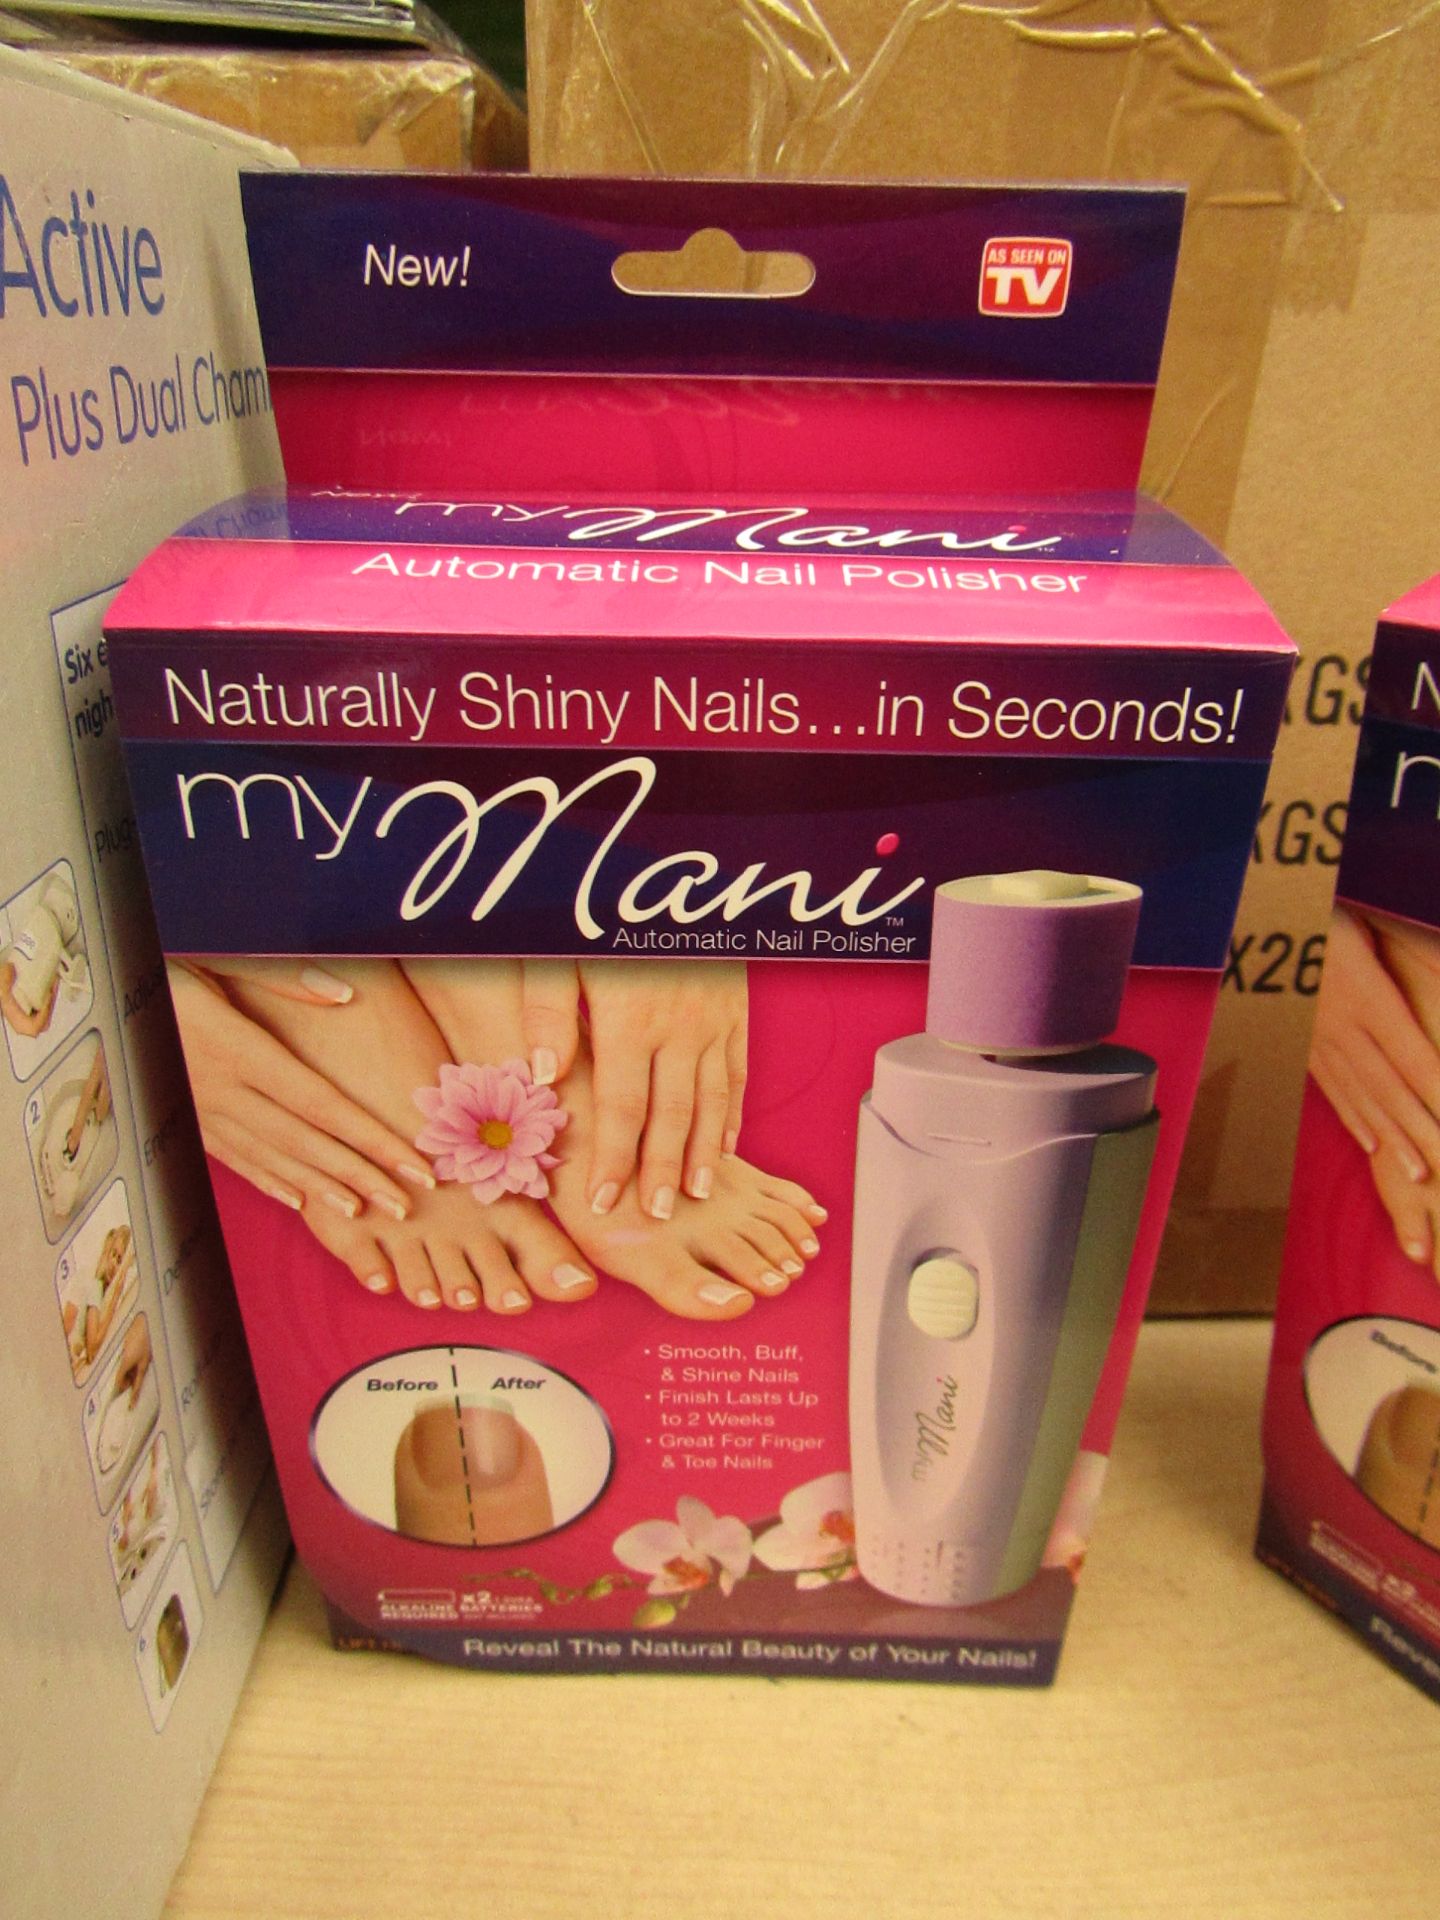 12 x My Mani automatic nail polishers, all brand new and boxed. Each RRP Circa £6.00